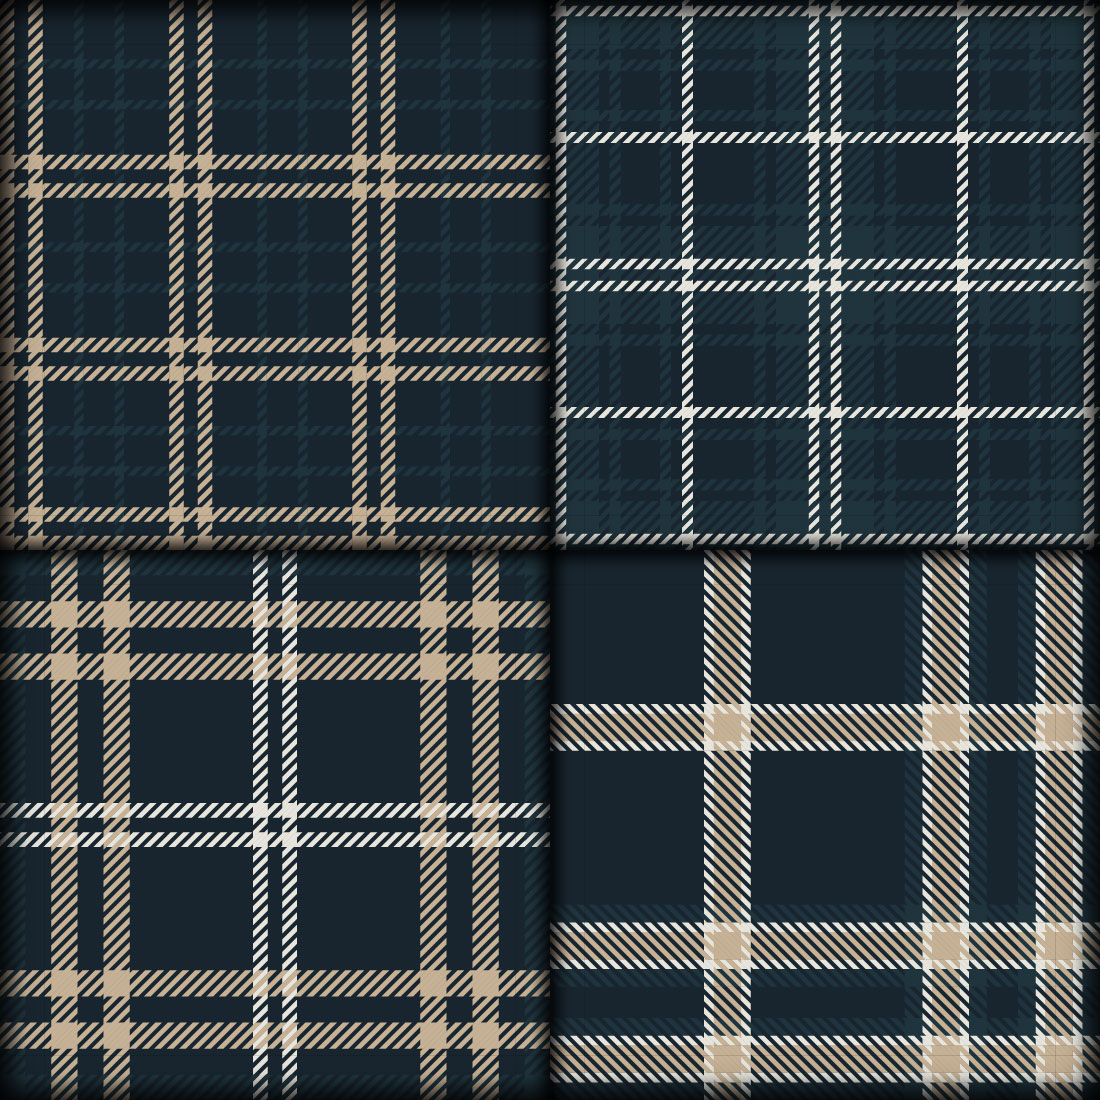 Bundle of check plaid pattern or scarf, blanket, throw, shirt other fashion textile design only $10 preview image.